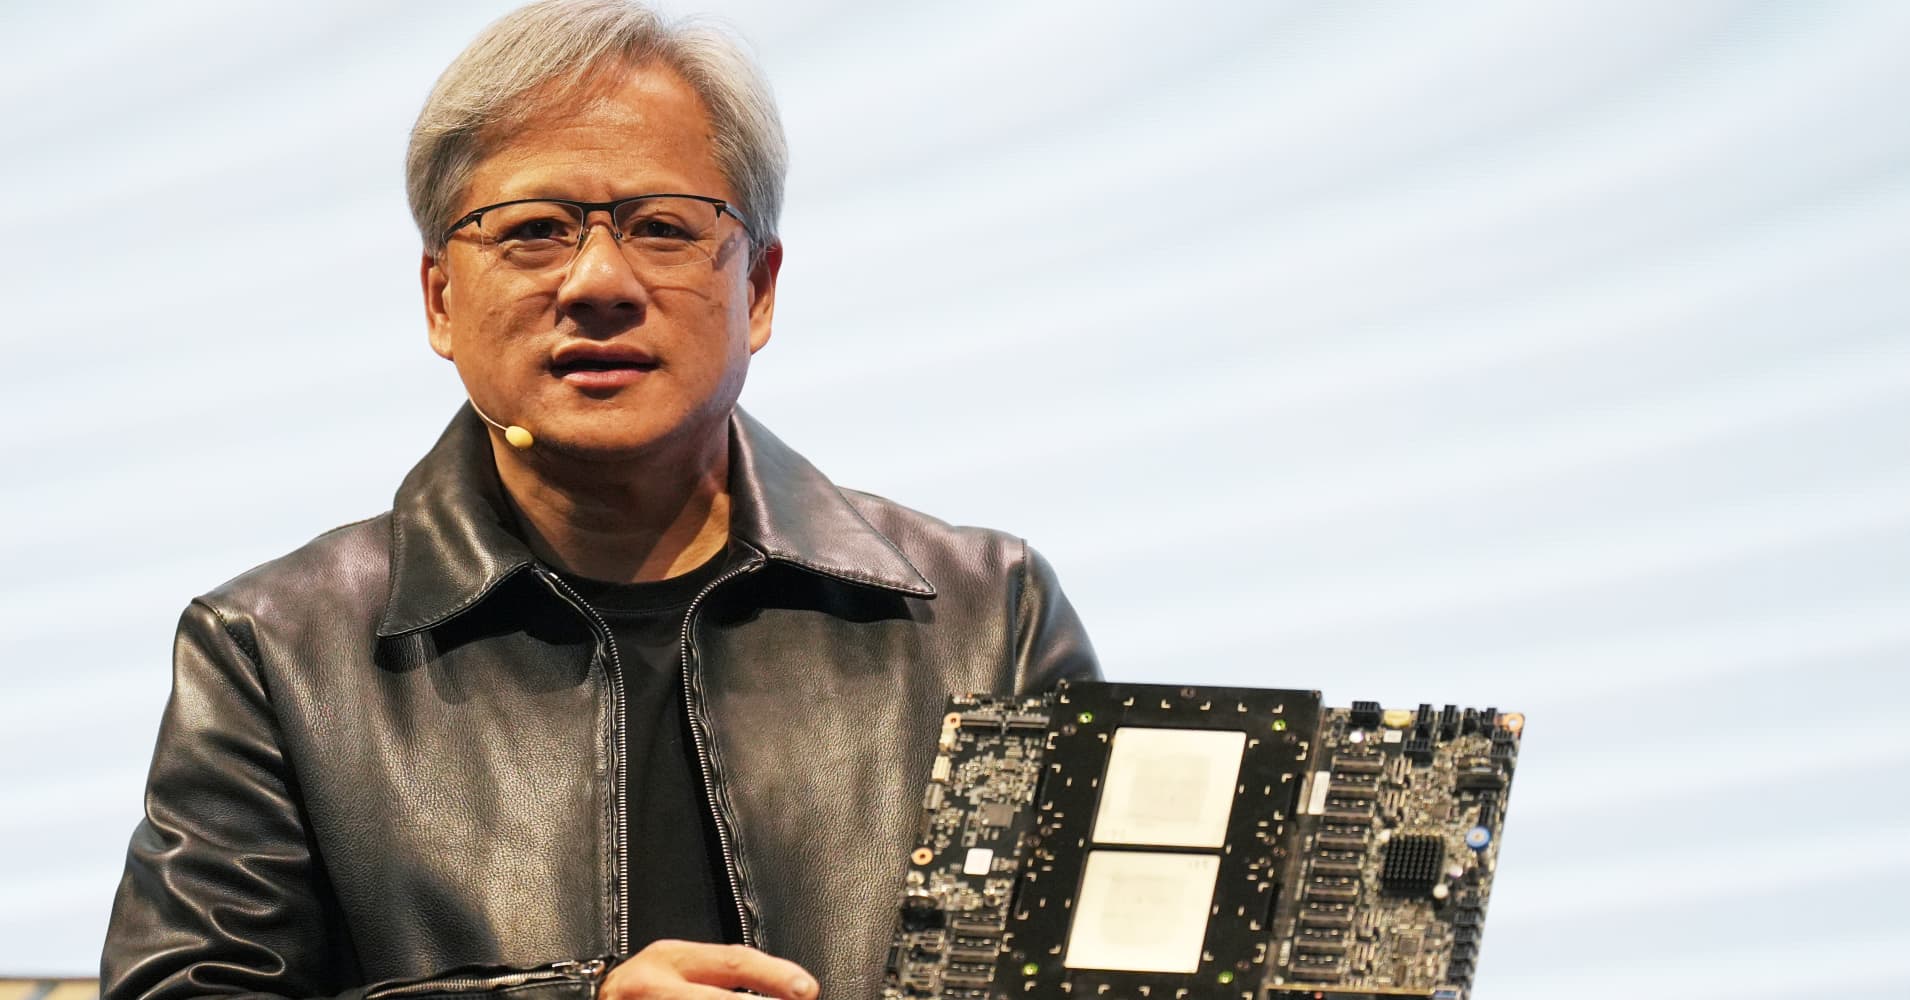 jensen huang started his $2 trillion company nvidia at a denny's breakfast booth